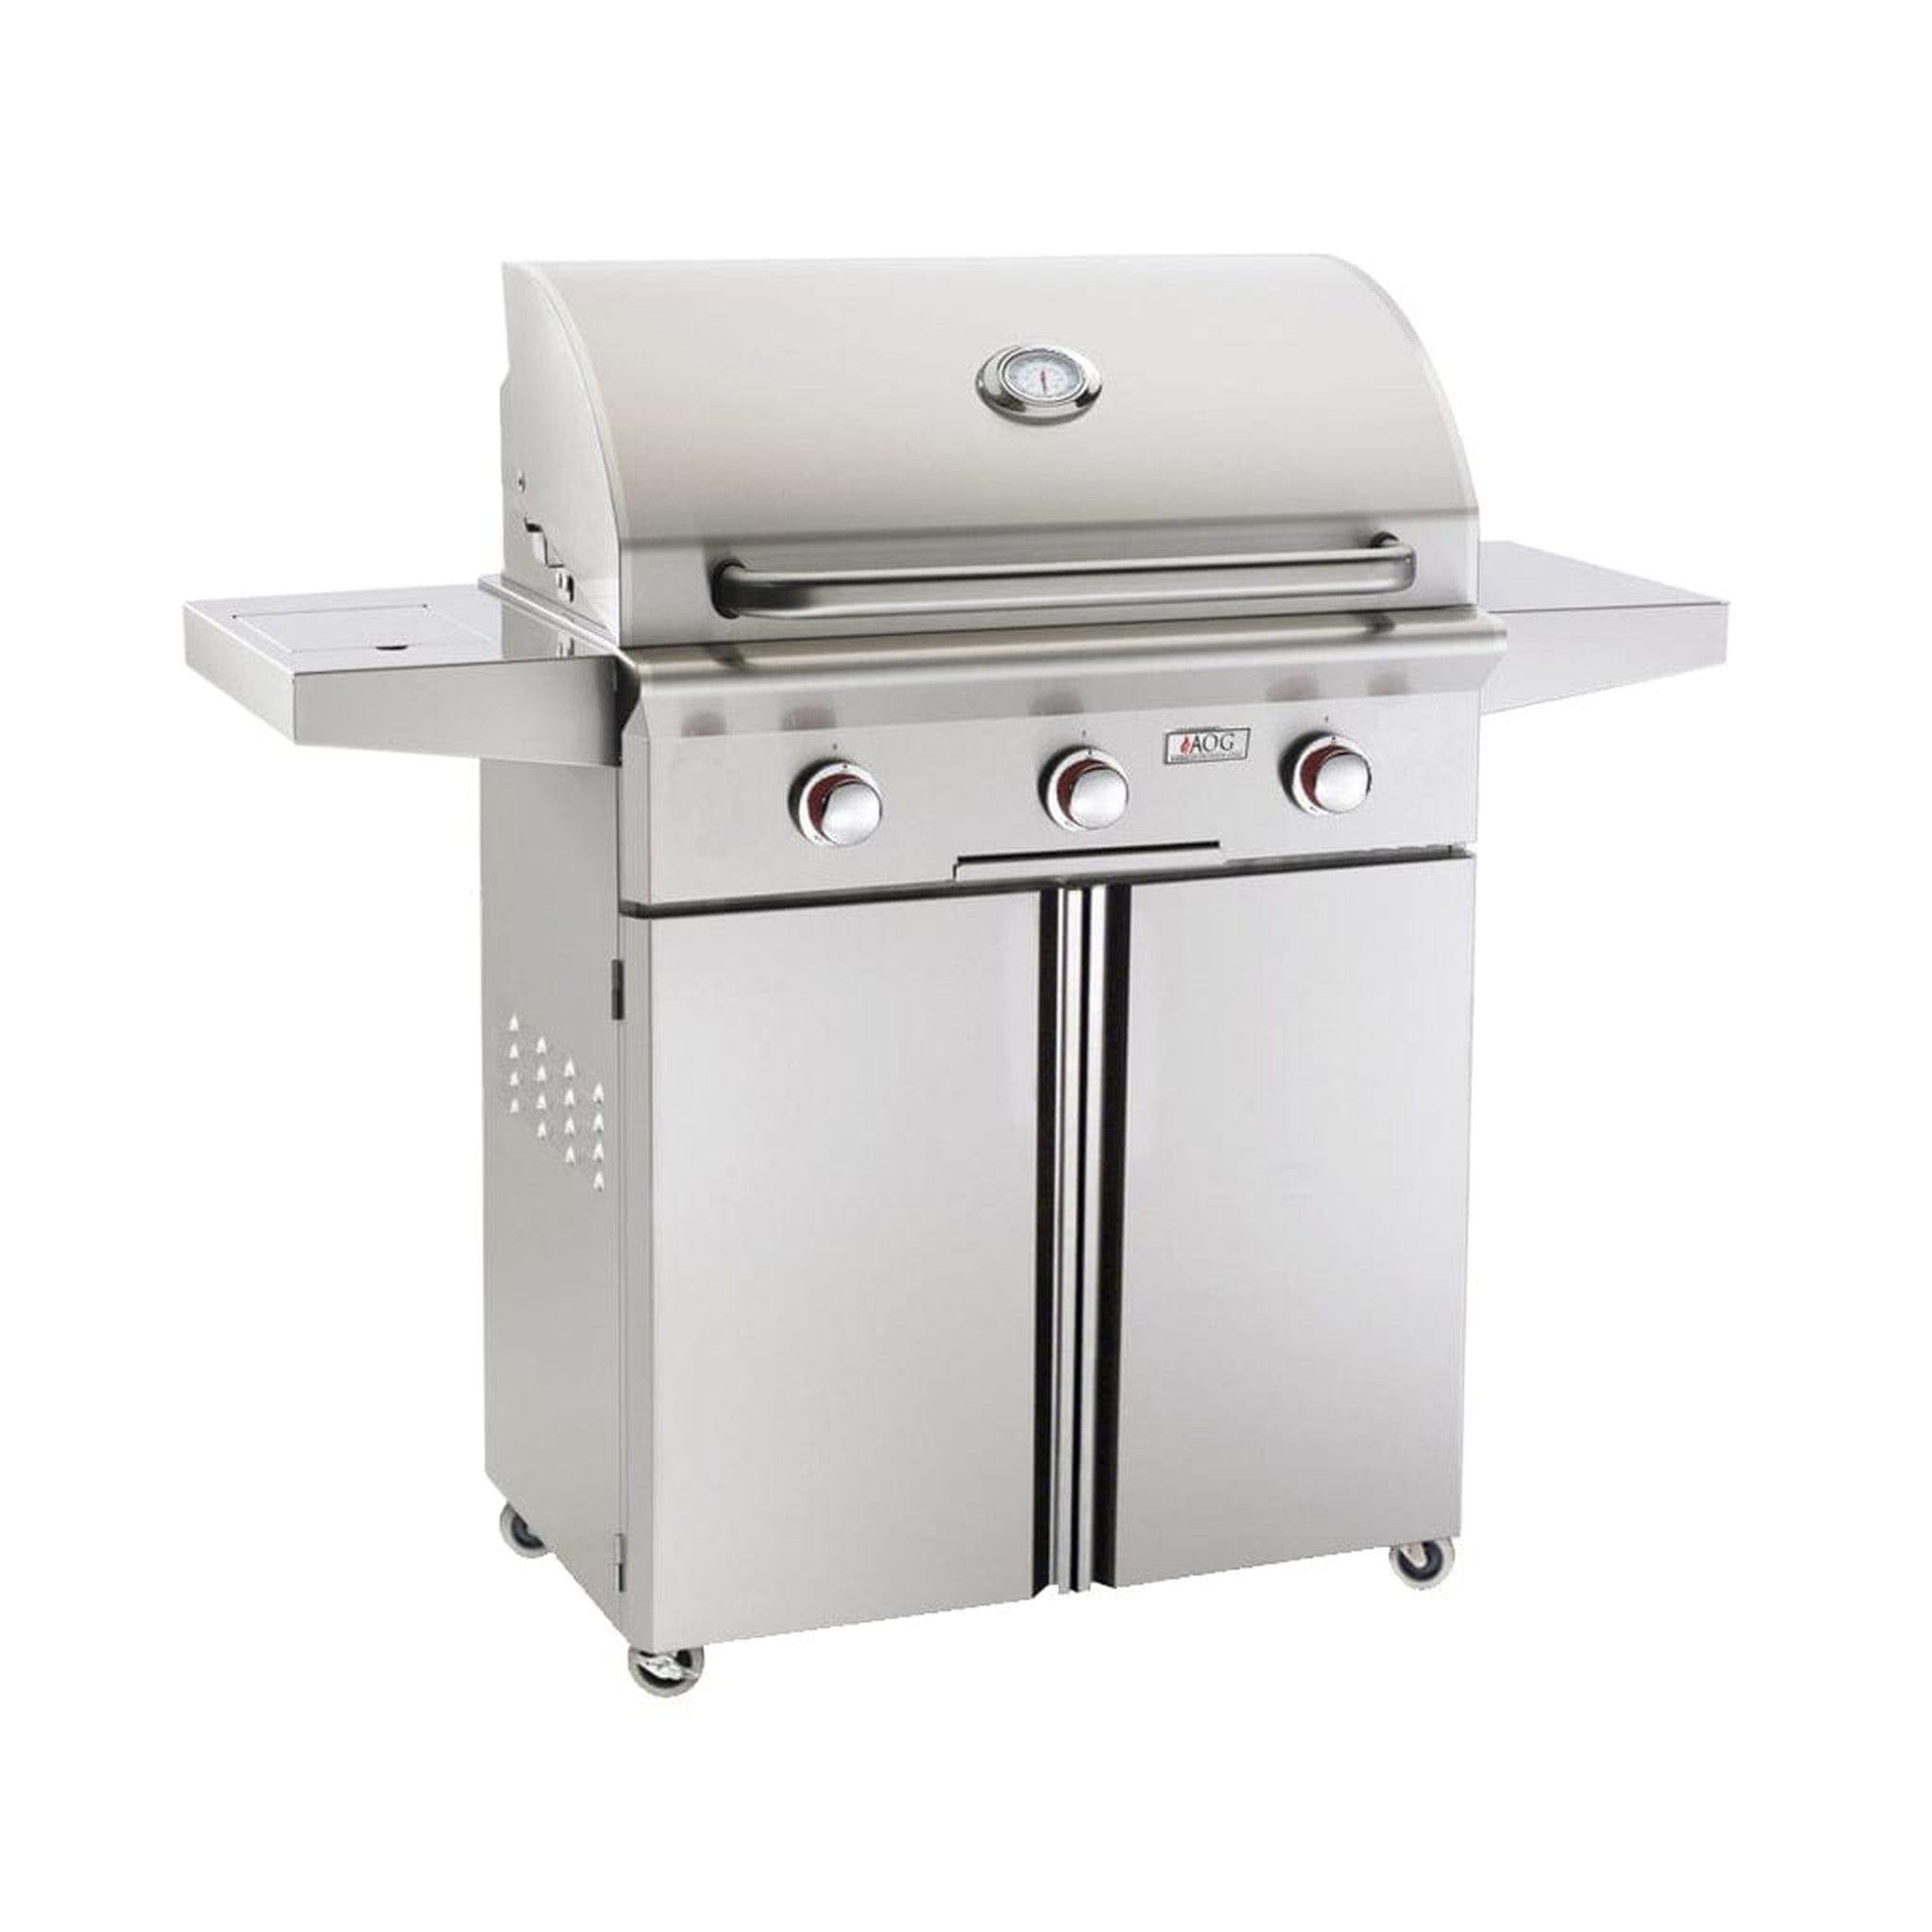 Grill Collection - The Best Selection of BBQ Grills Online